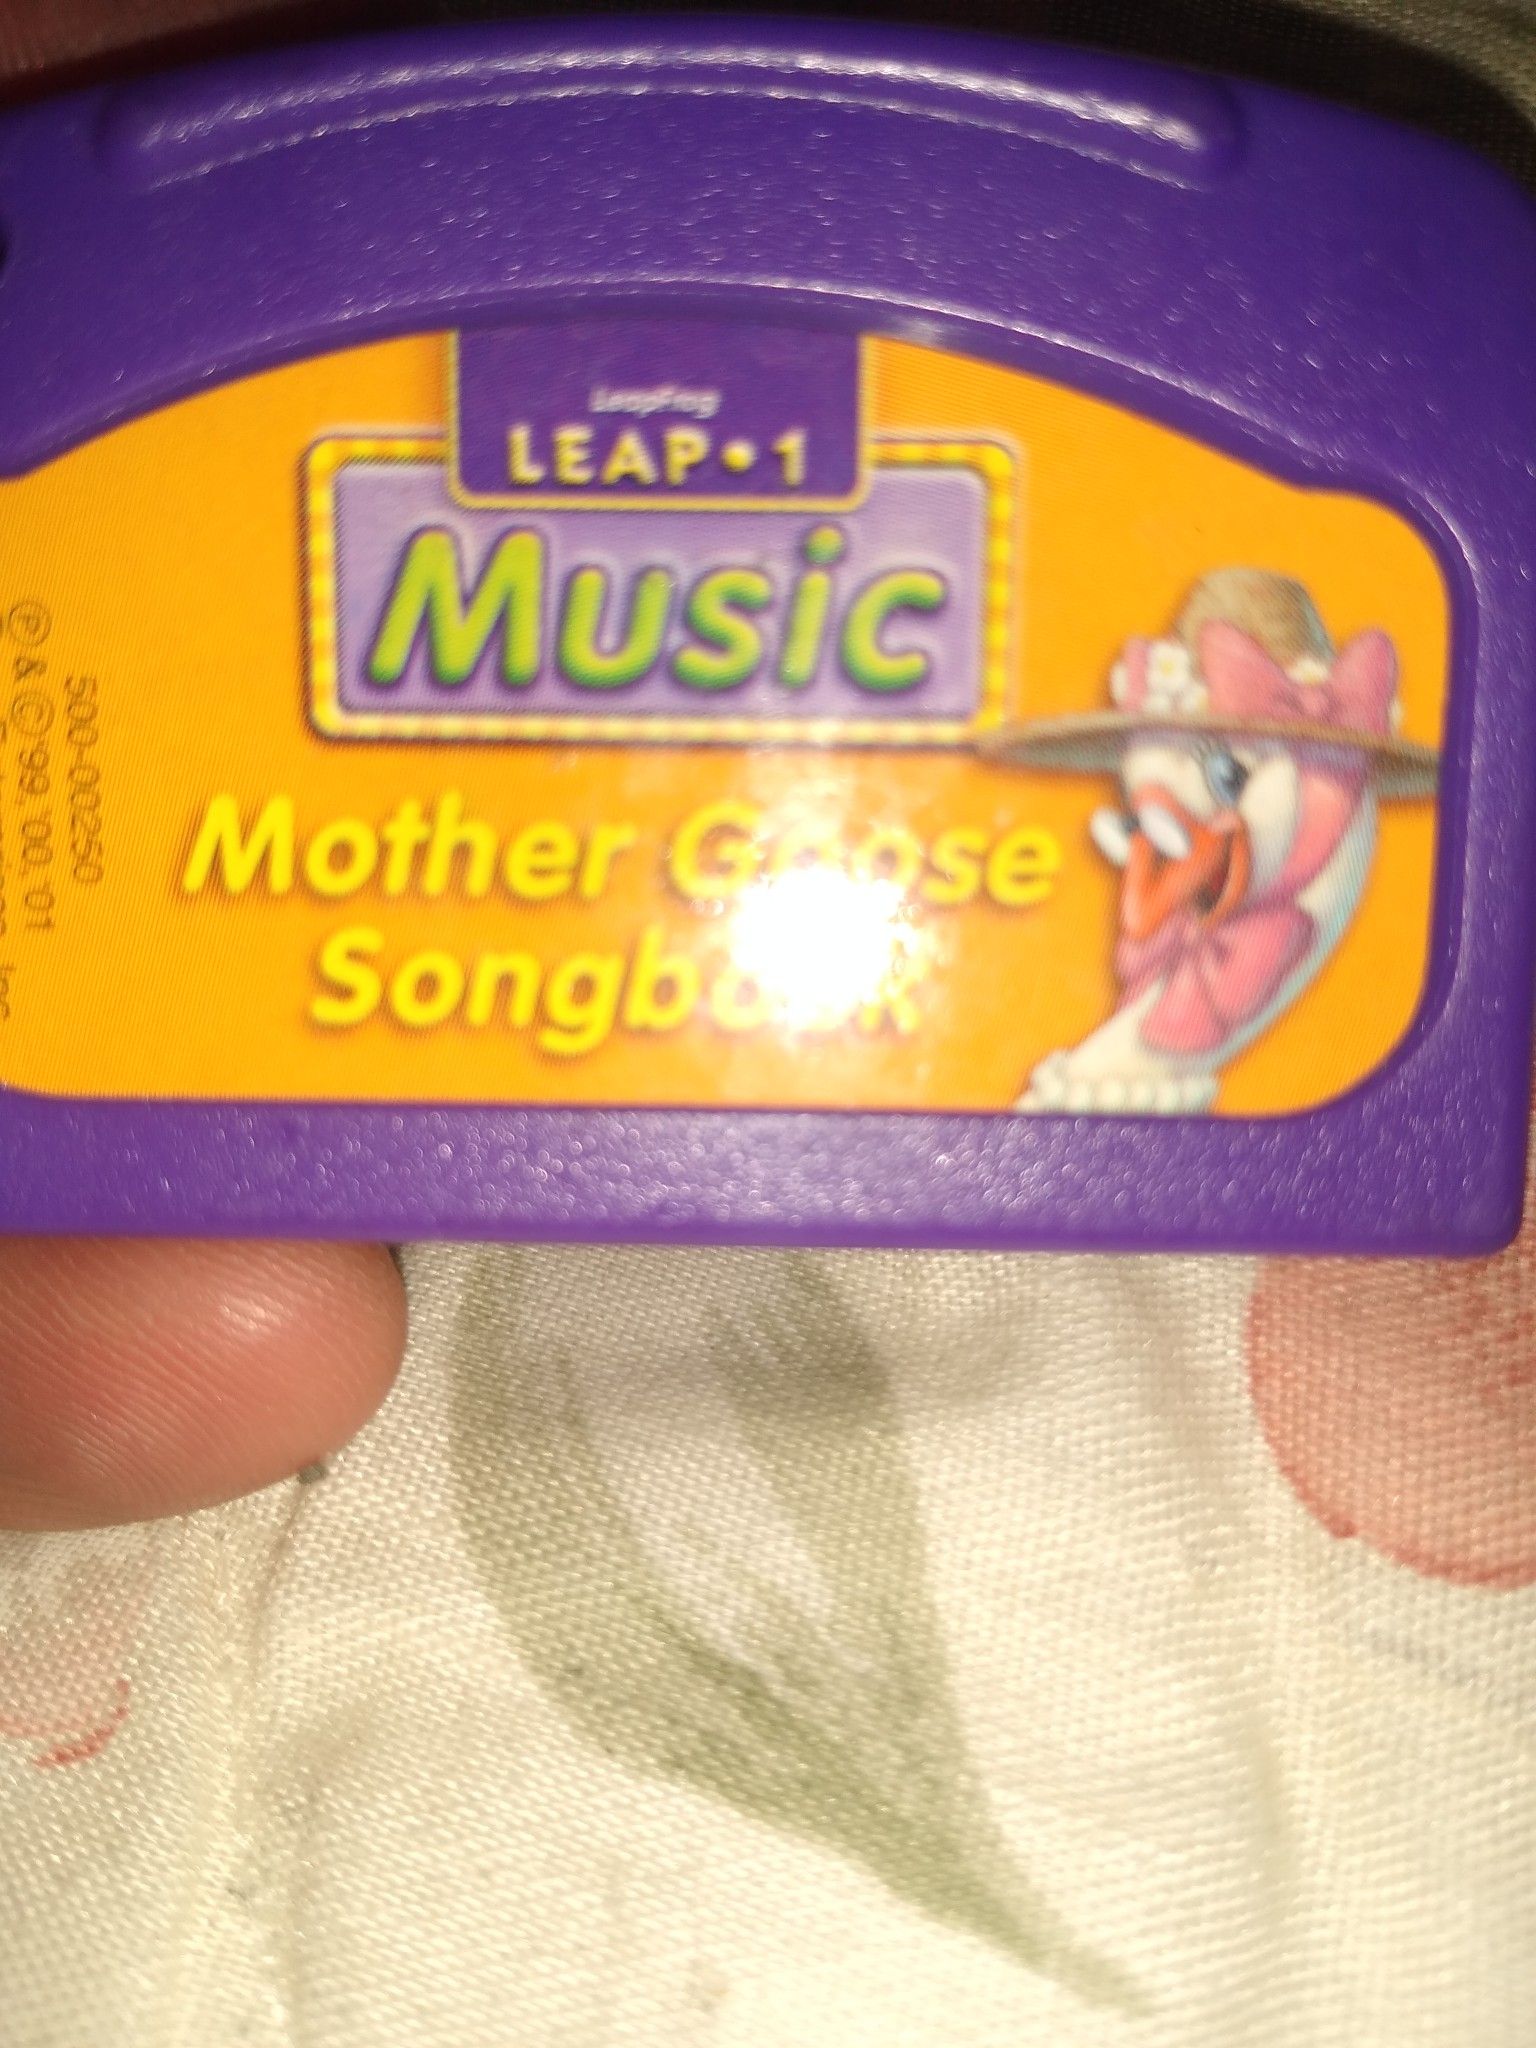 LEAP FROG LEAPPAD LEAP 1 MOTHER GOOSE SONGBOOK LEARNING GAME CARTRIDGE - NICE